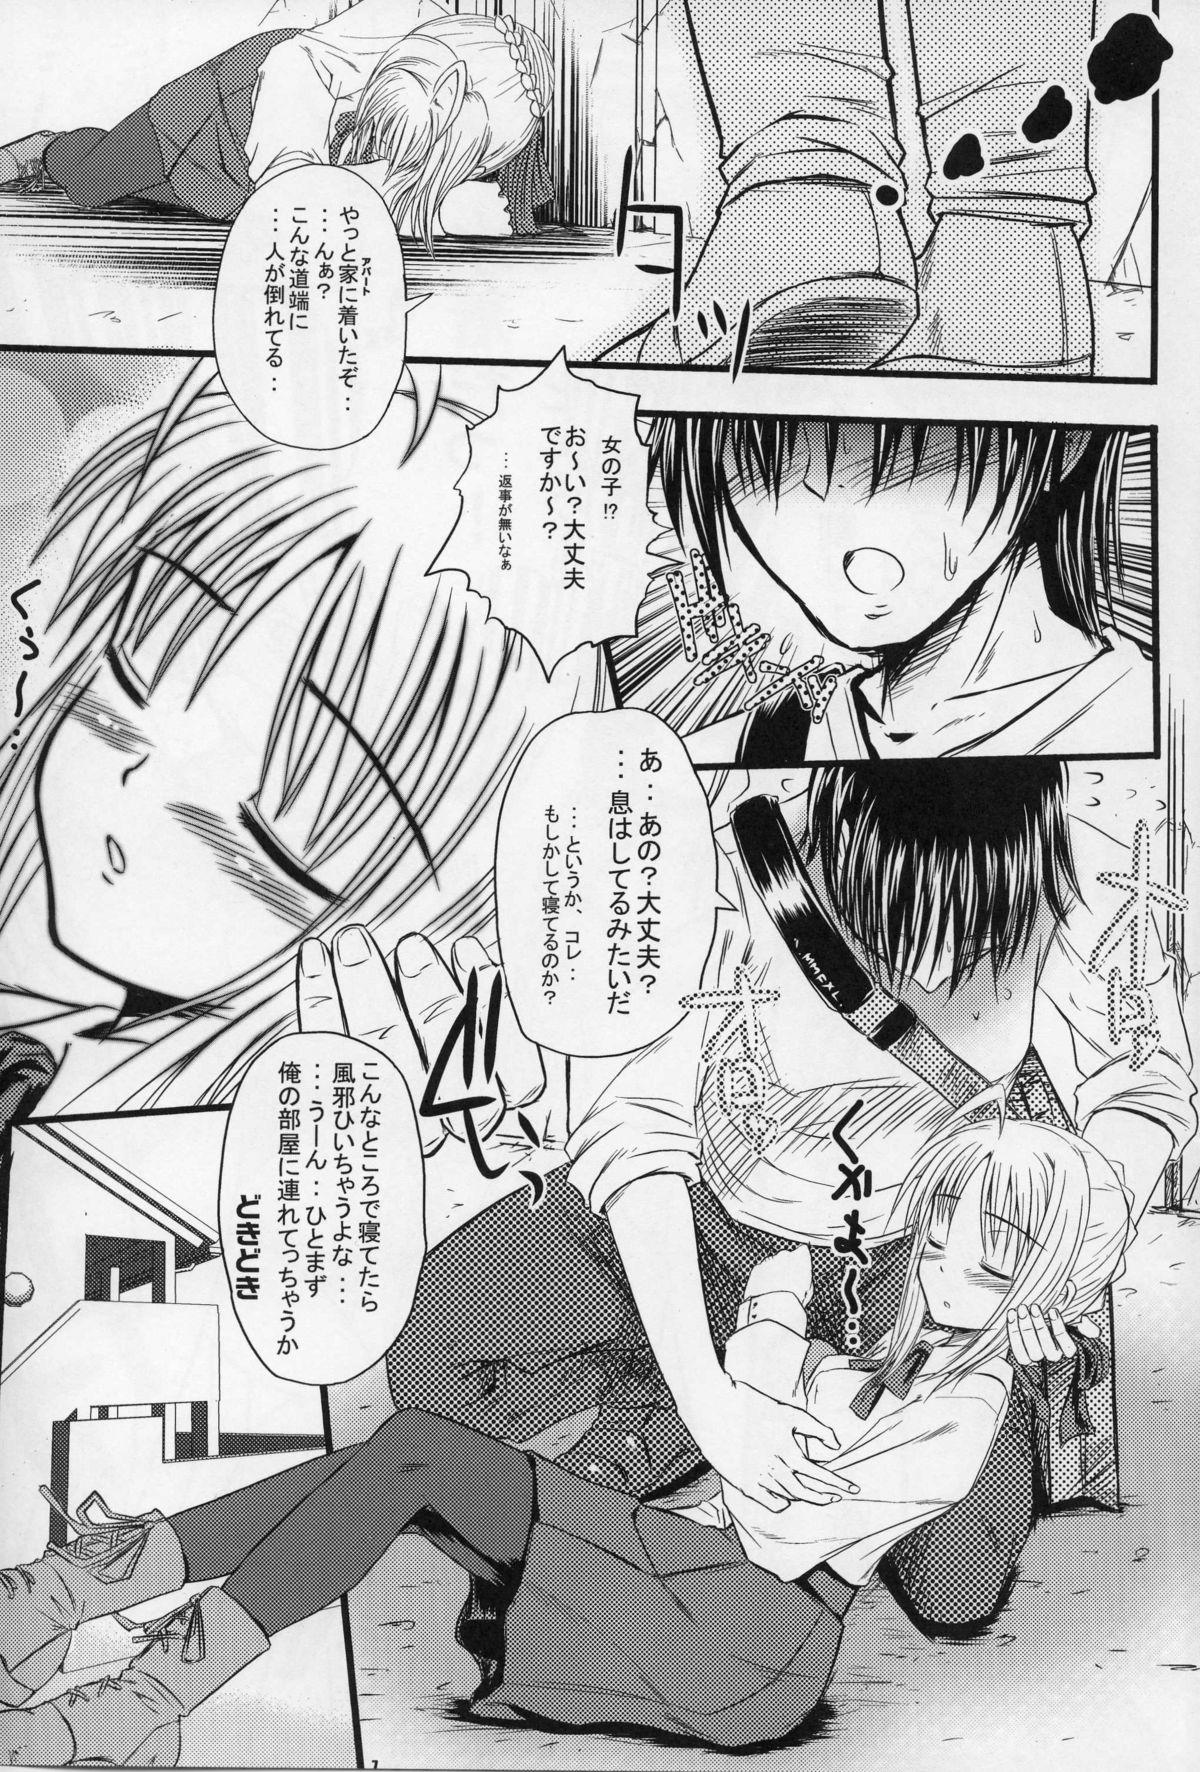 Famosa Saber of Stripes. - Fate stay night Threeway - Page 4